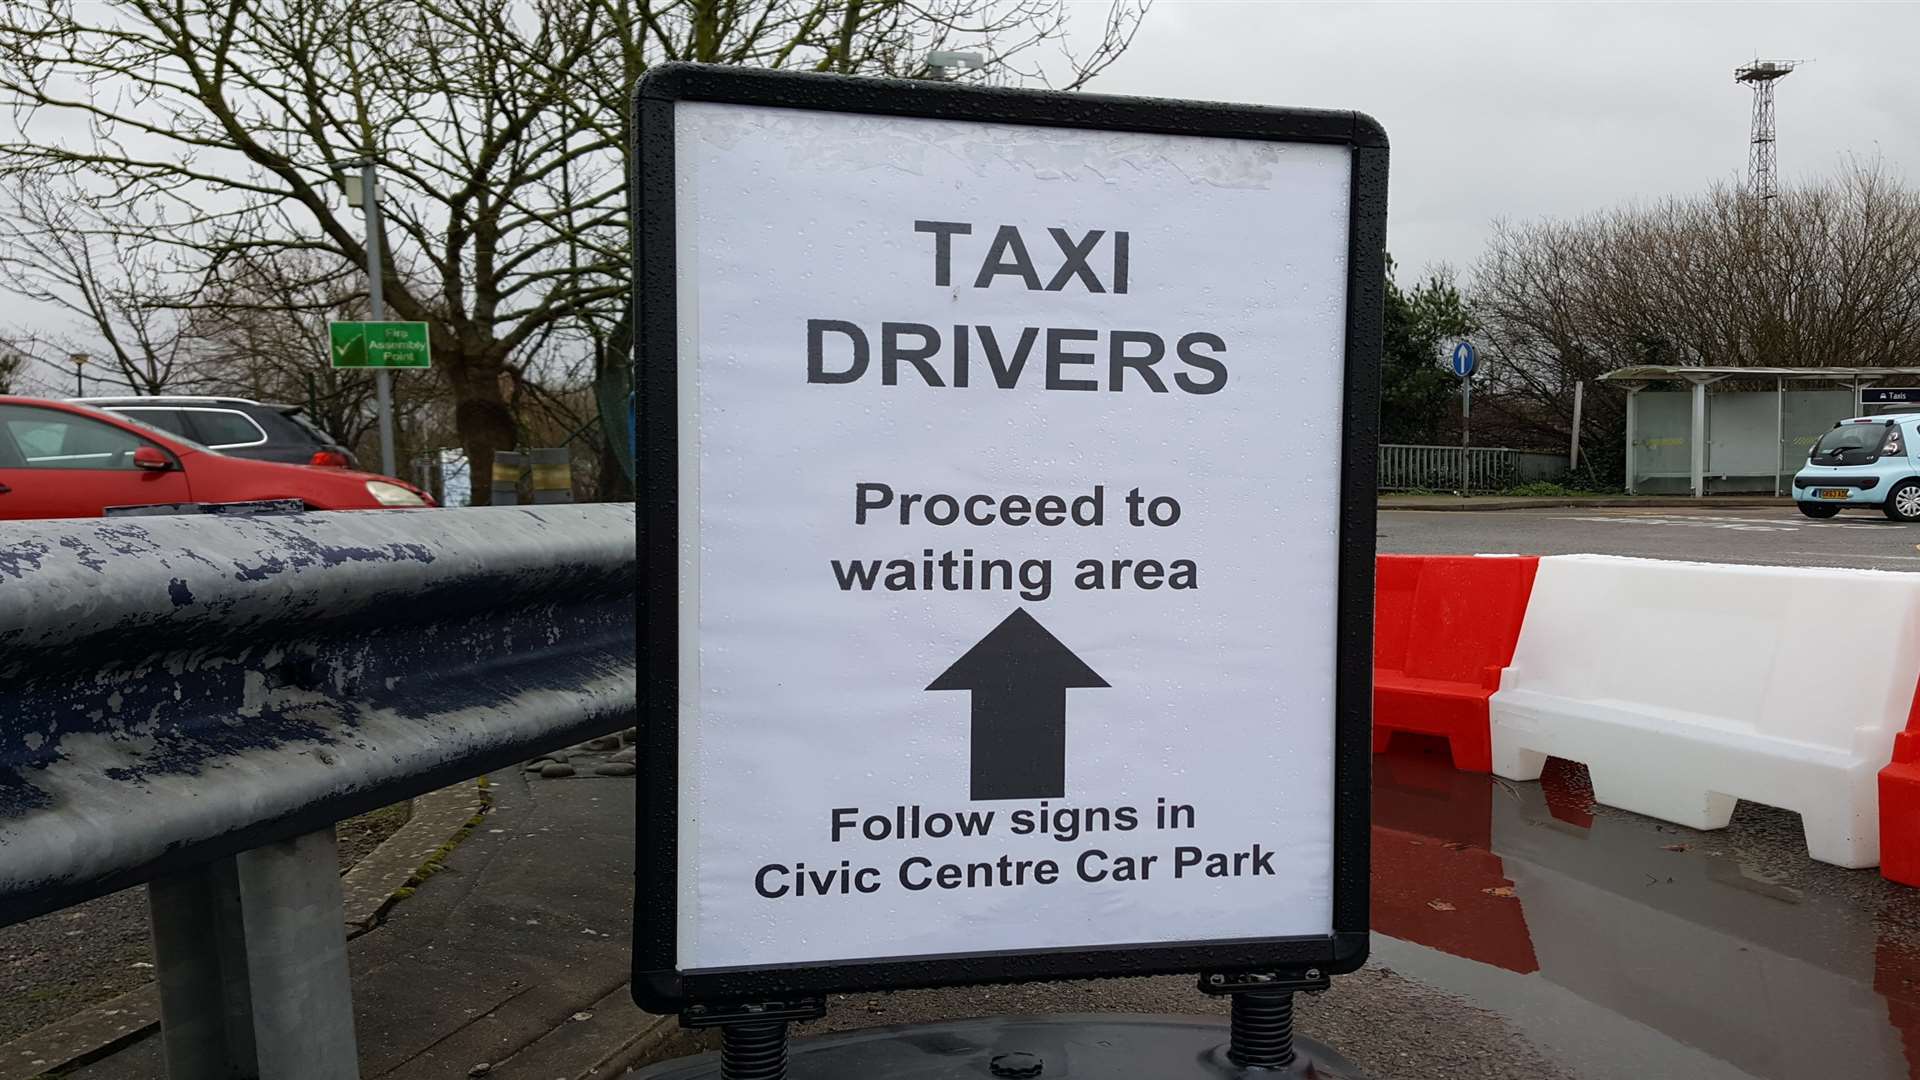 Signs directing the cabbies